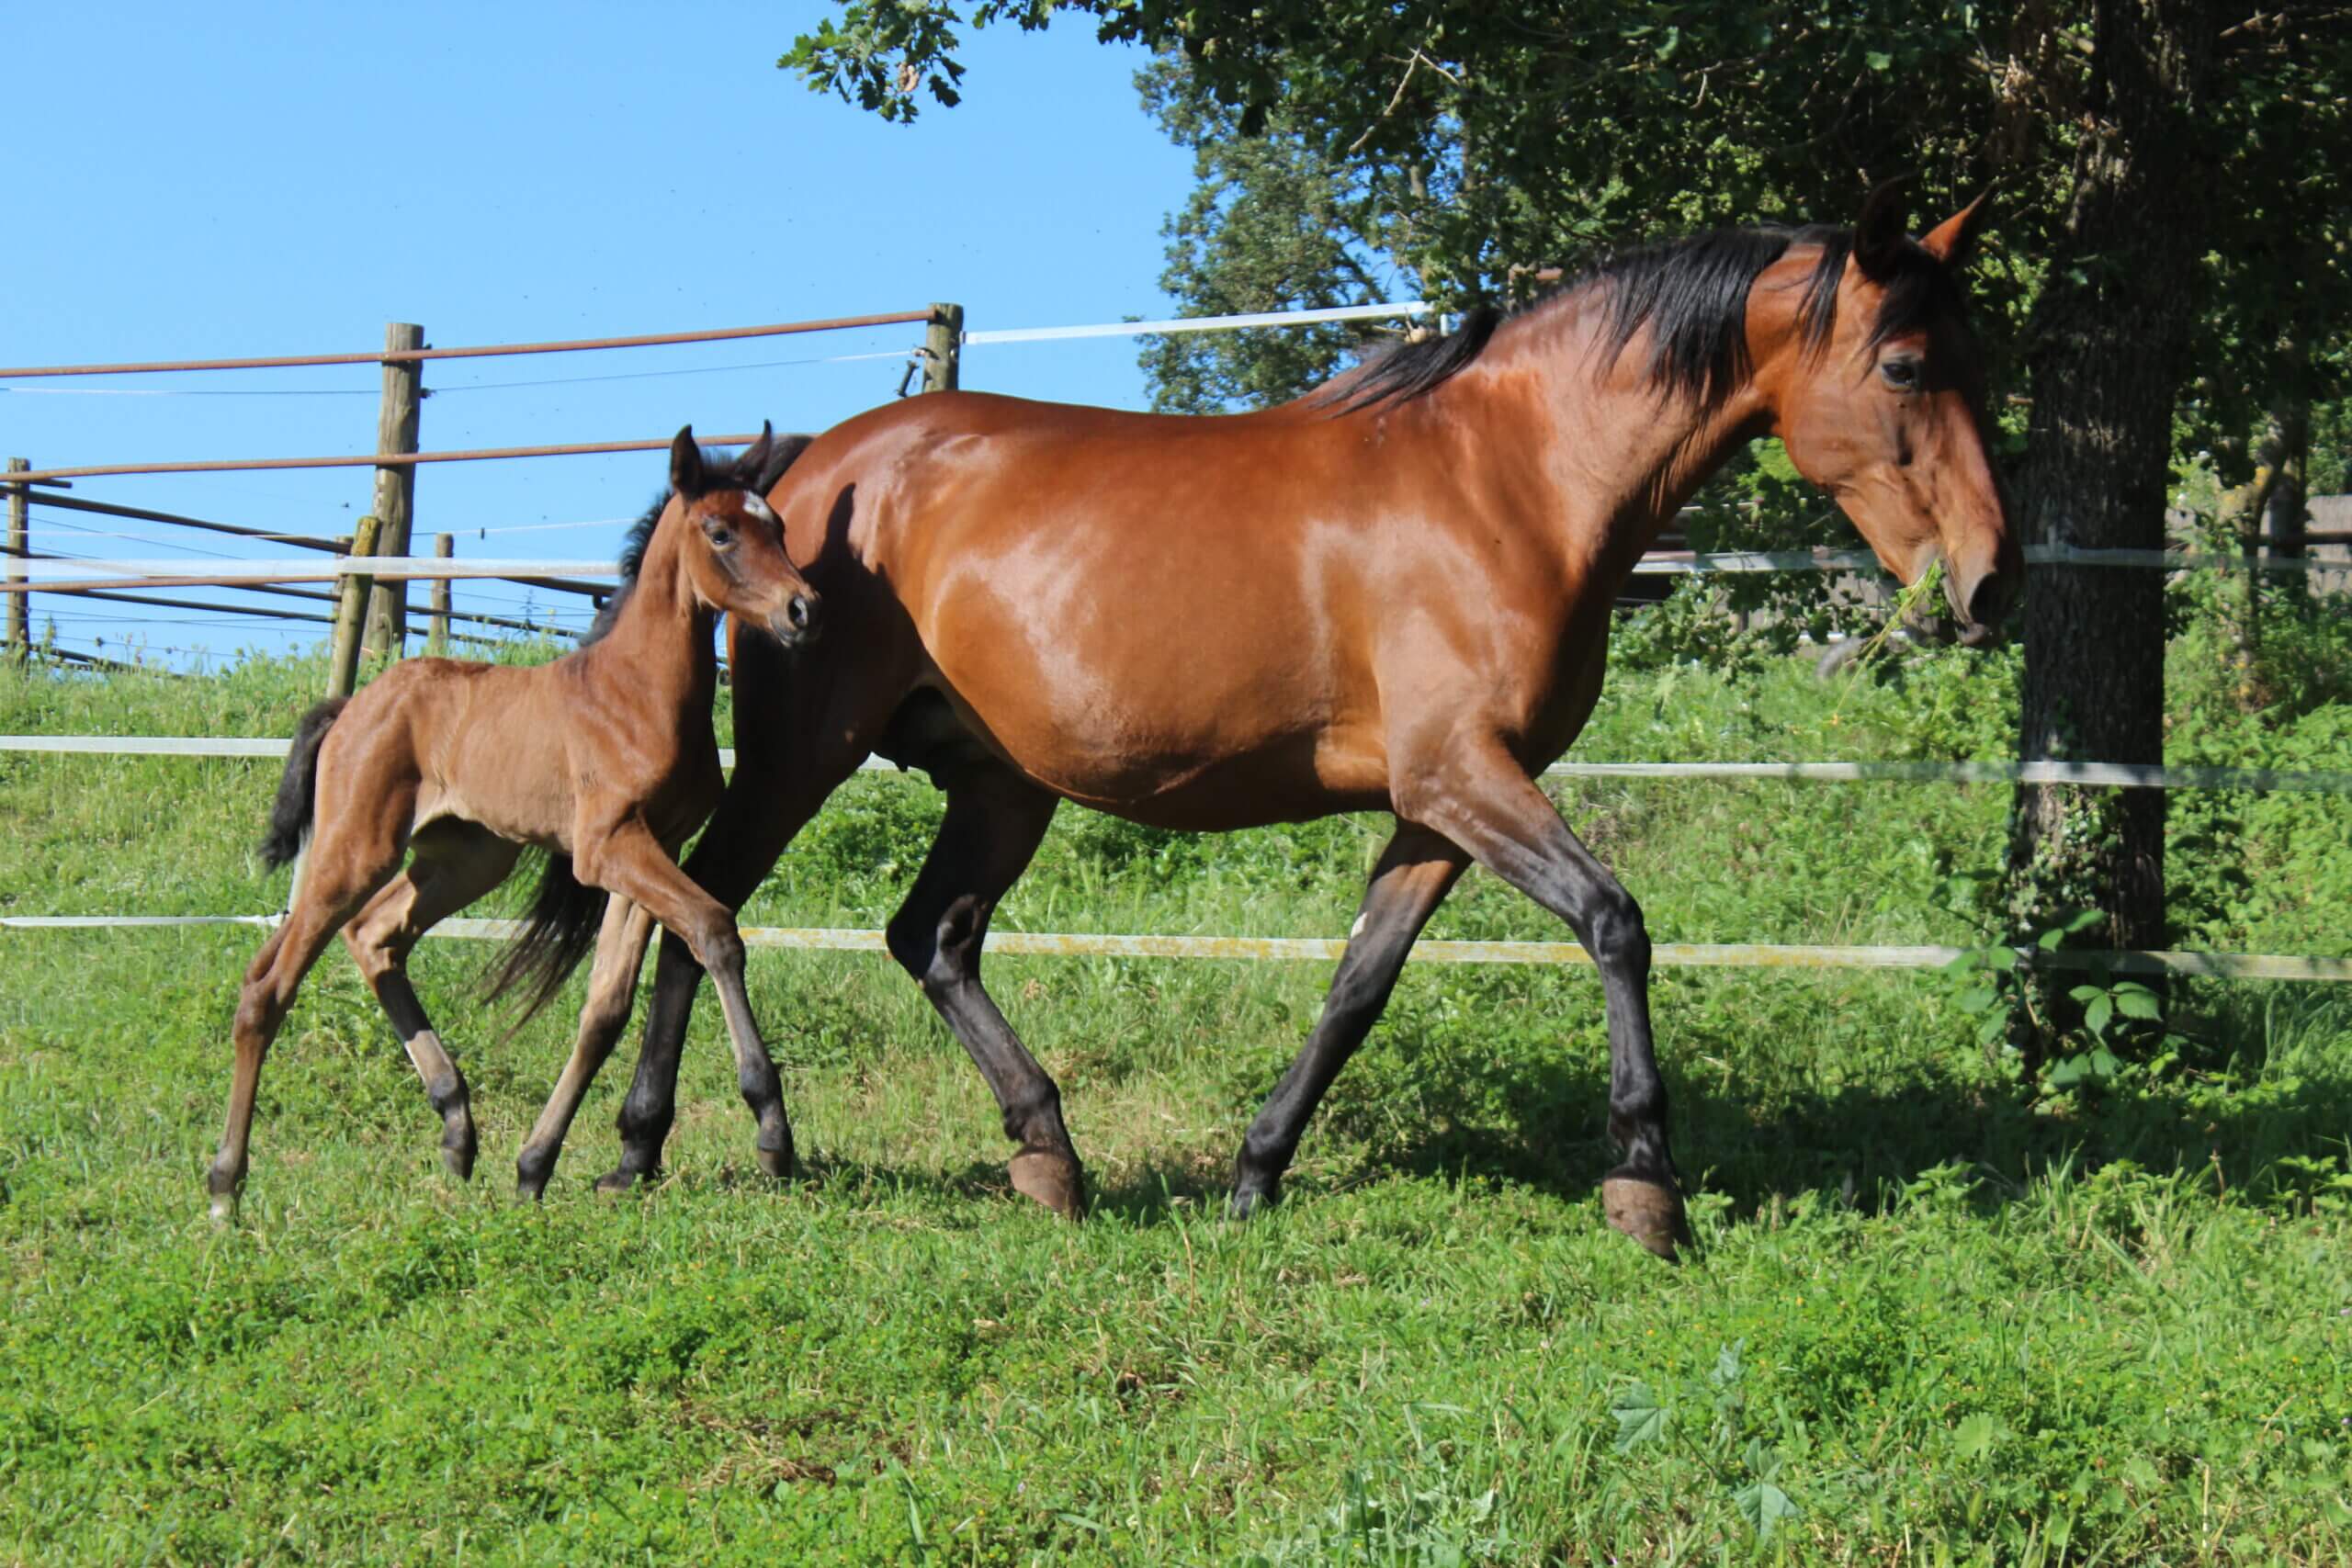 First foal born in Spain using a procedure which enhances reproductive efficiency and genetic preservation in elite animals